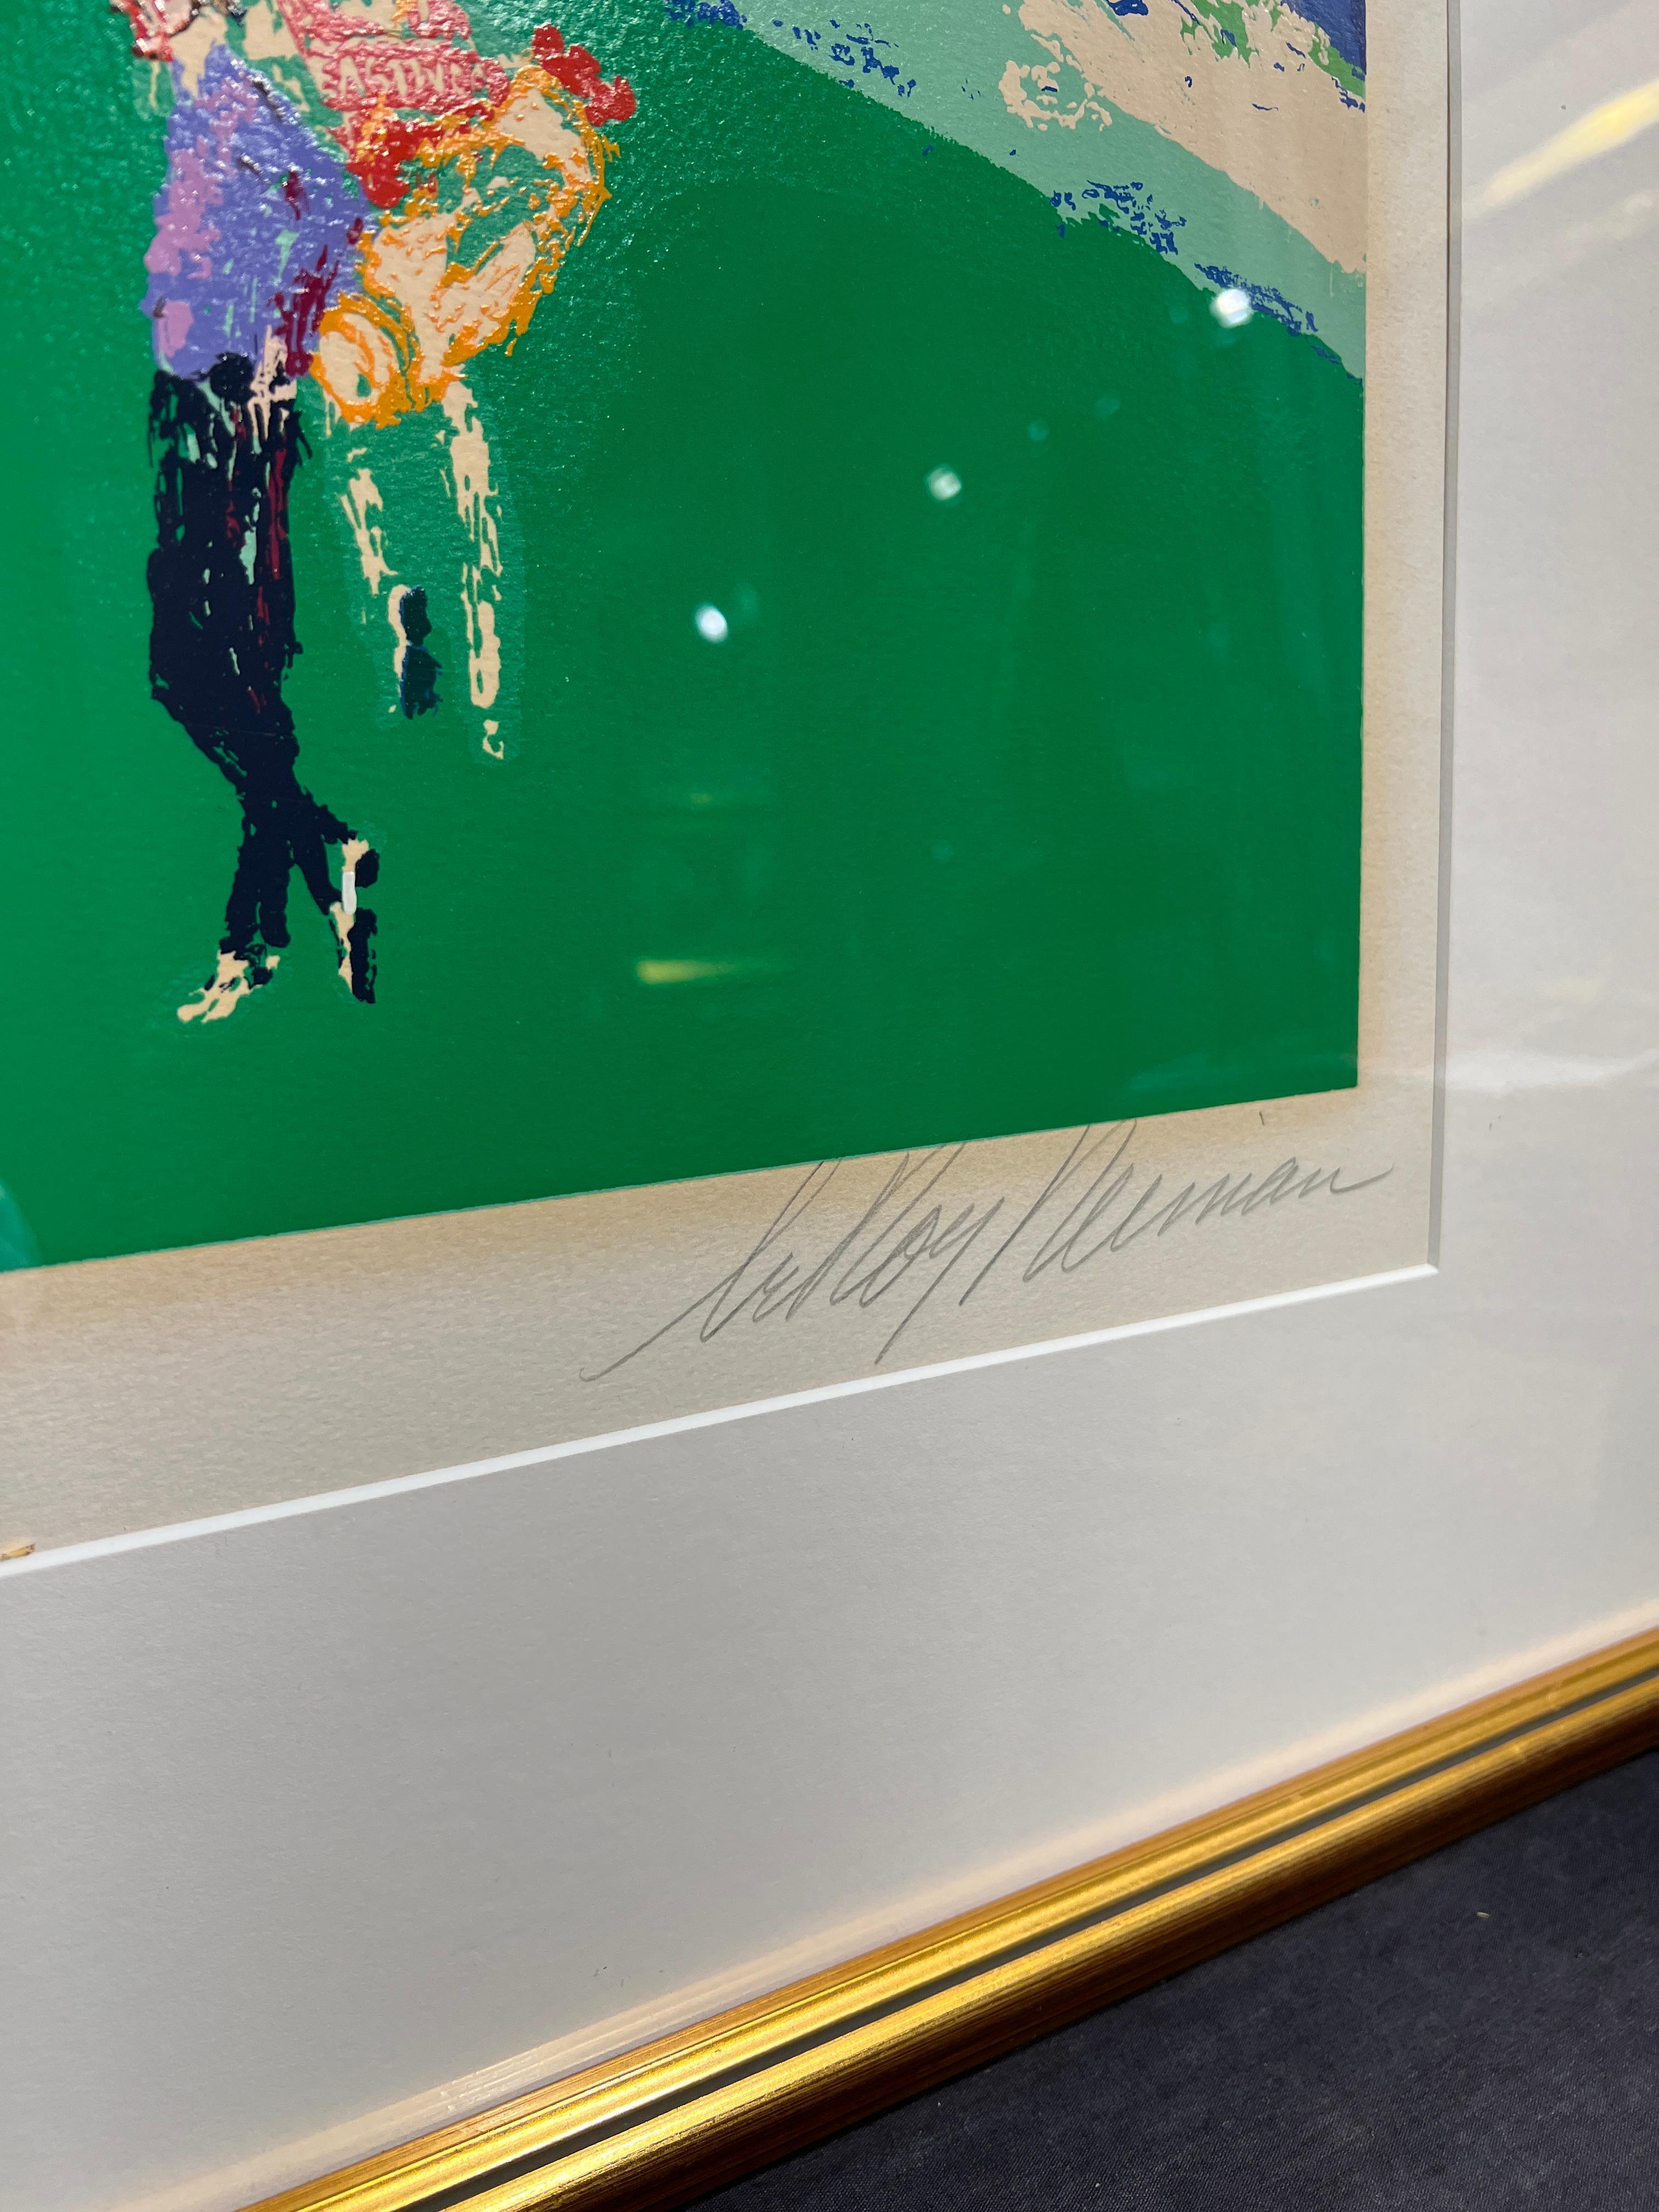 The 18th at Pebble Beach
Leroy Neiman (American, 1921-2012)
Signed in pencil lower right
Edition 176/400 lower left
26 x 43 inches
37.25 x 54.5 inches with frame

Known for his bright, colorful paintings and screen prints of famous sports stars in a